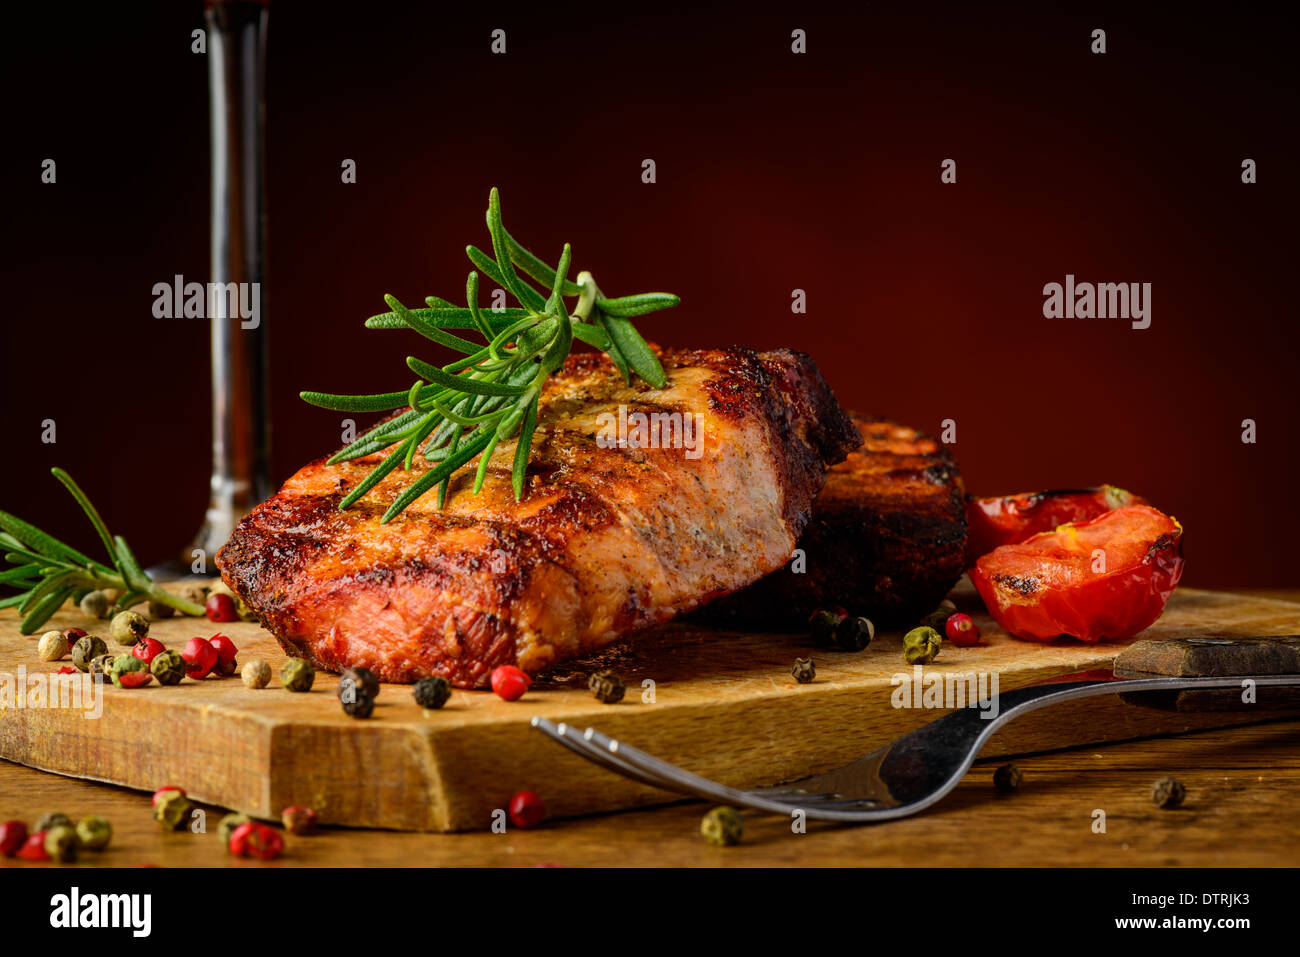 still life with grilled steak meal, herbs and spices Stock Photo